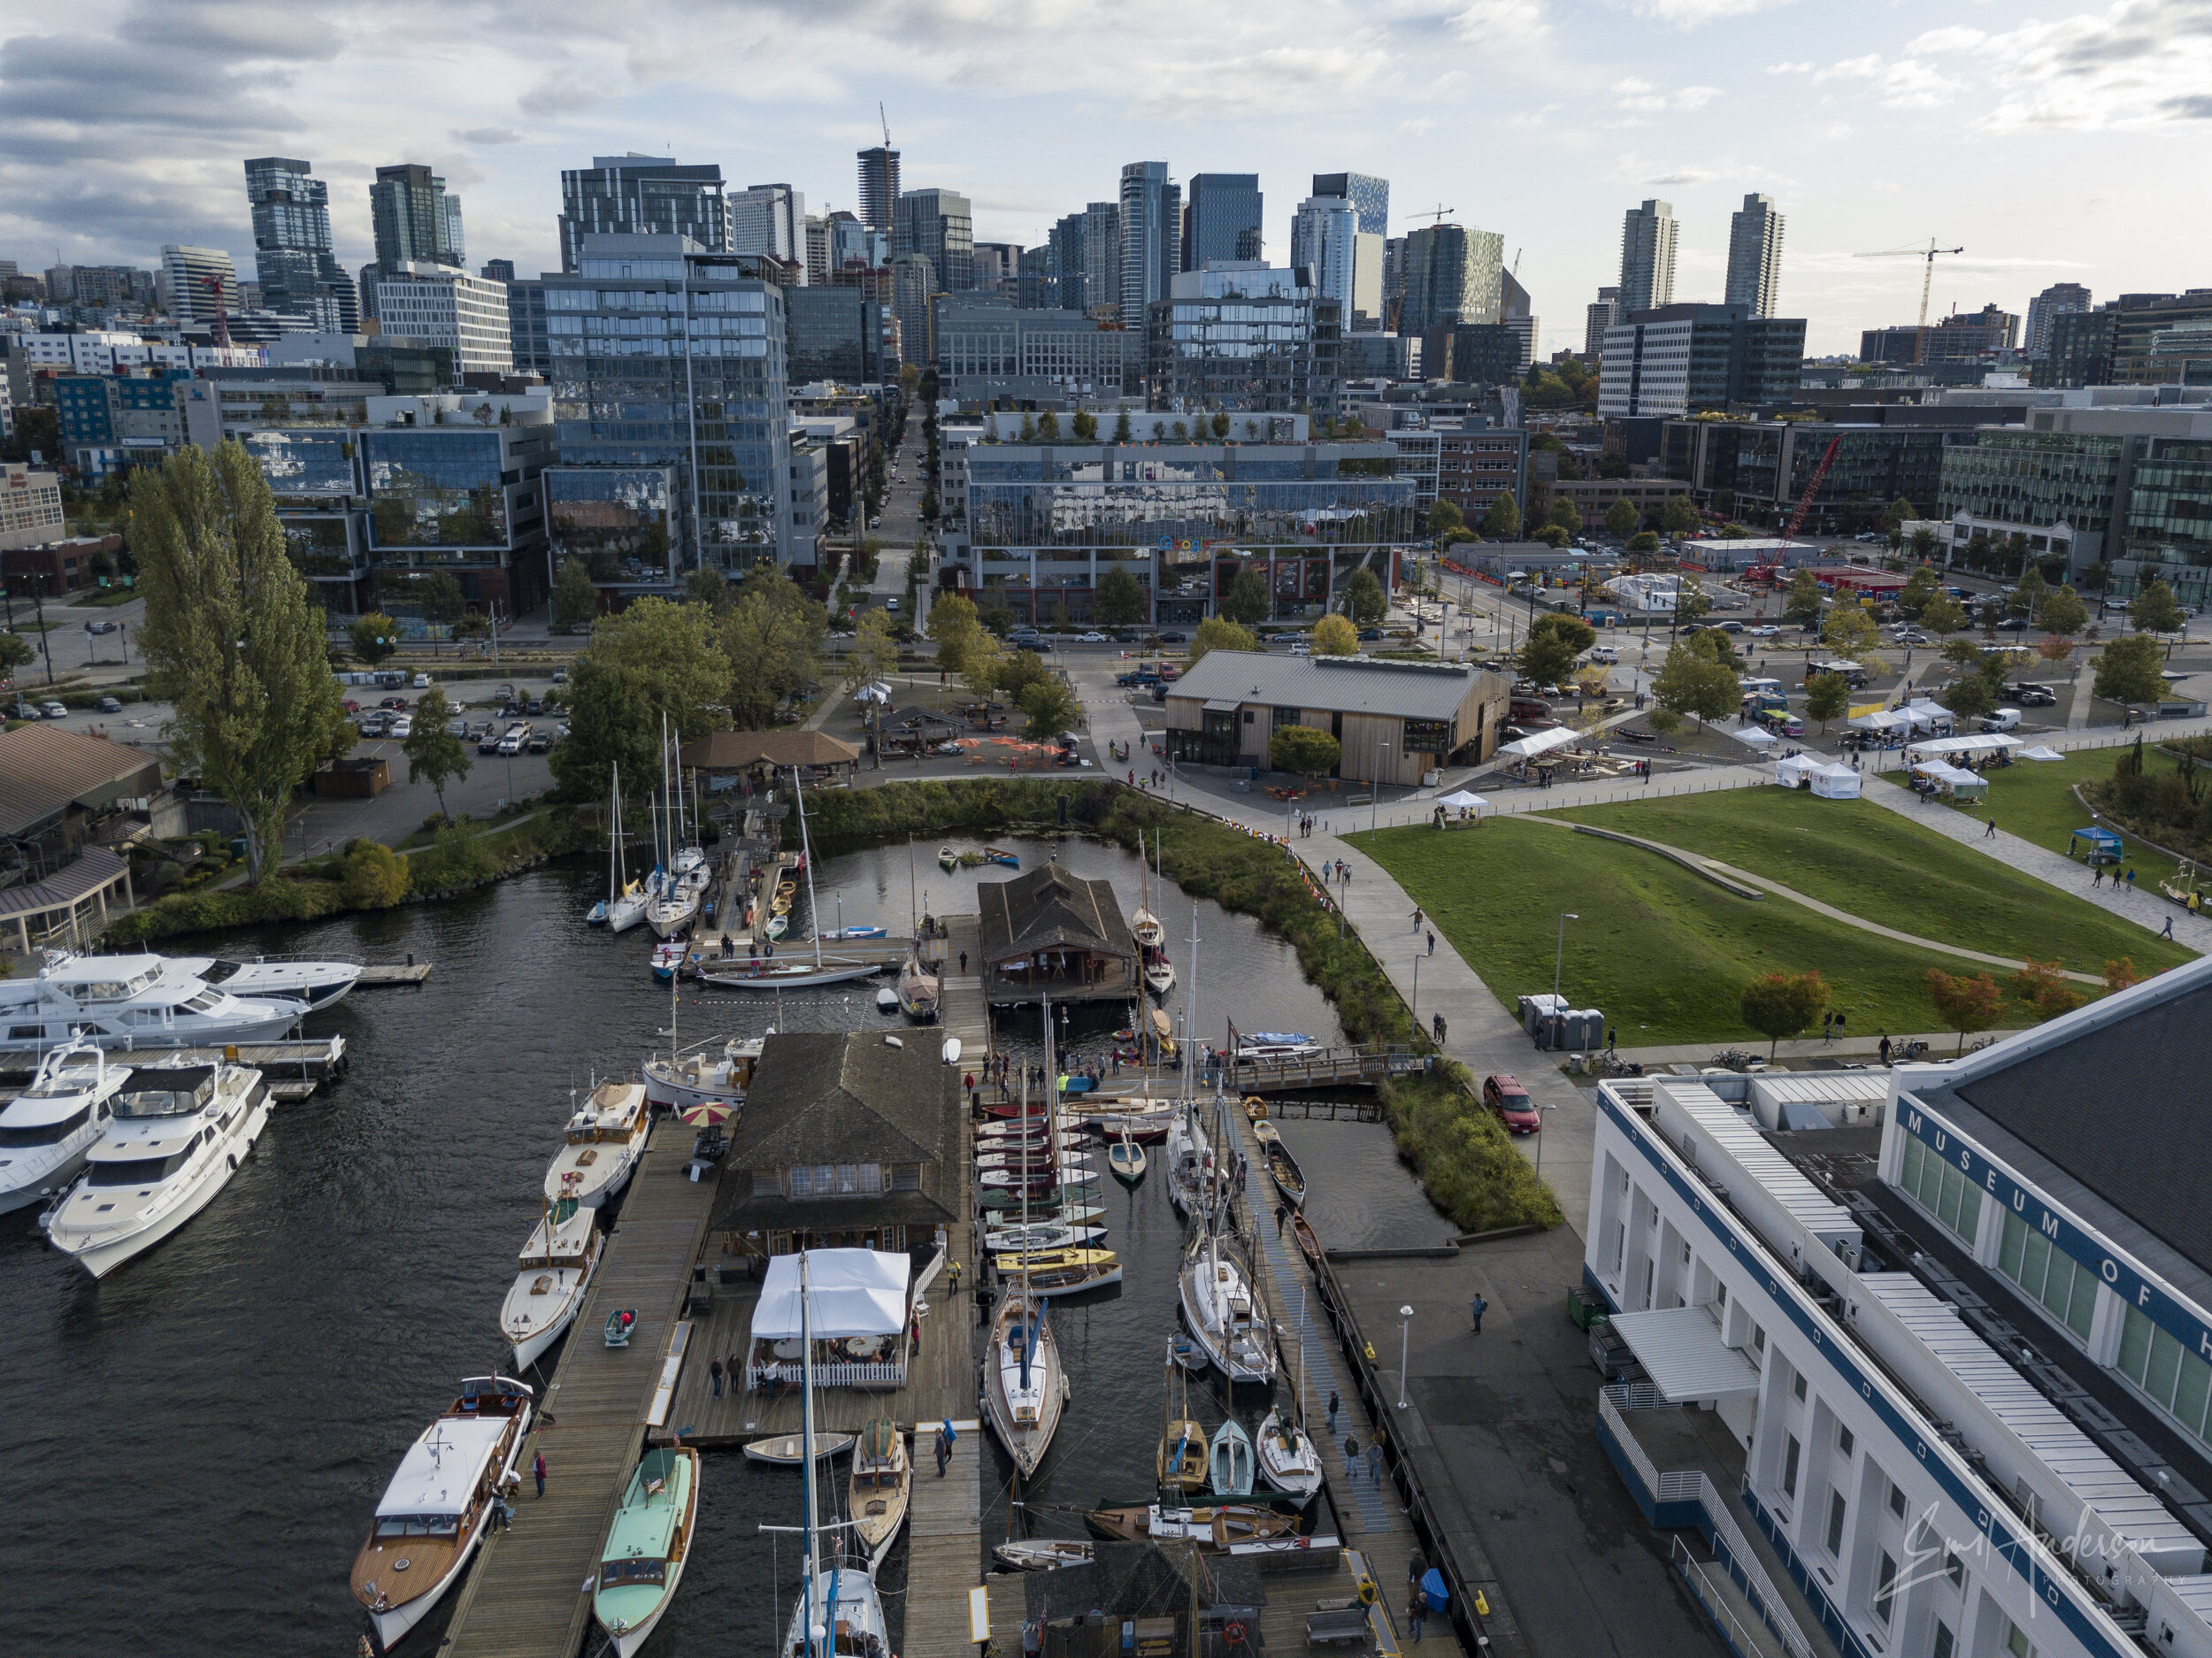 Aerial view of the Center for Wooden Boats waterway and Lake Union Park